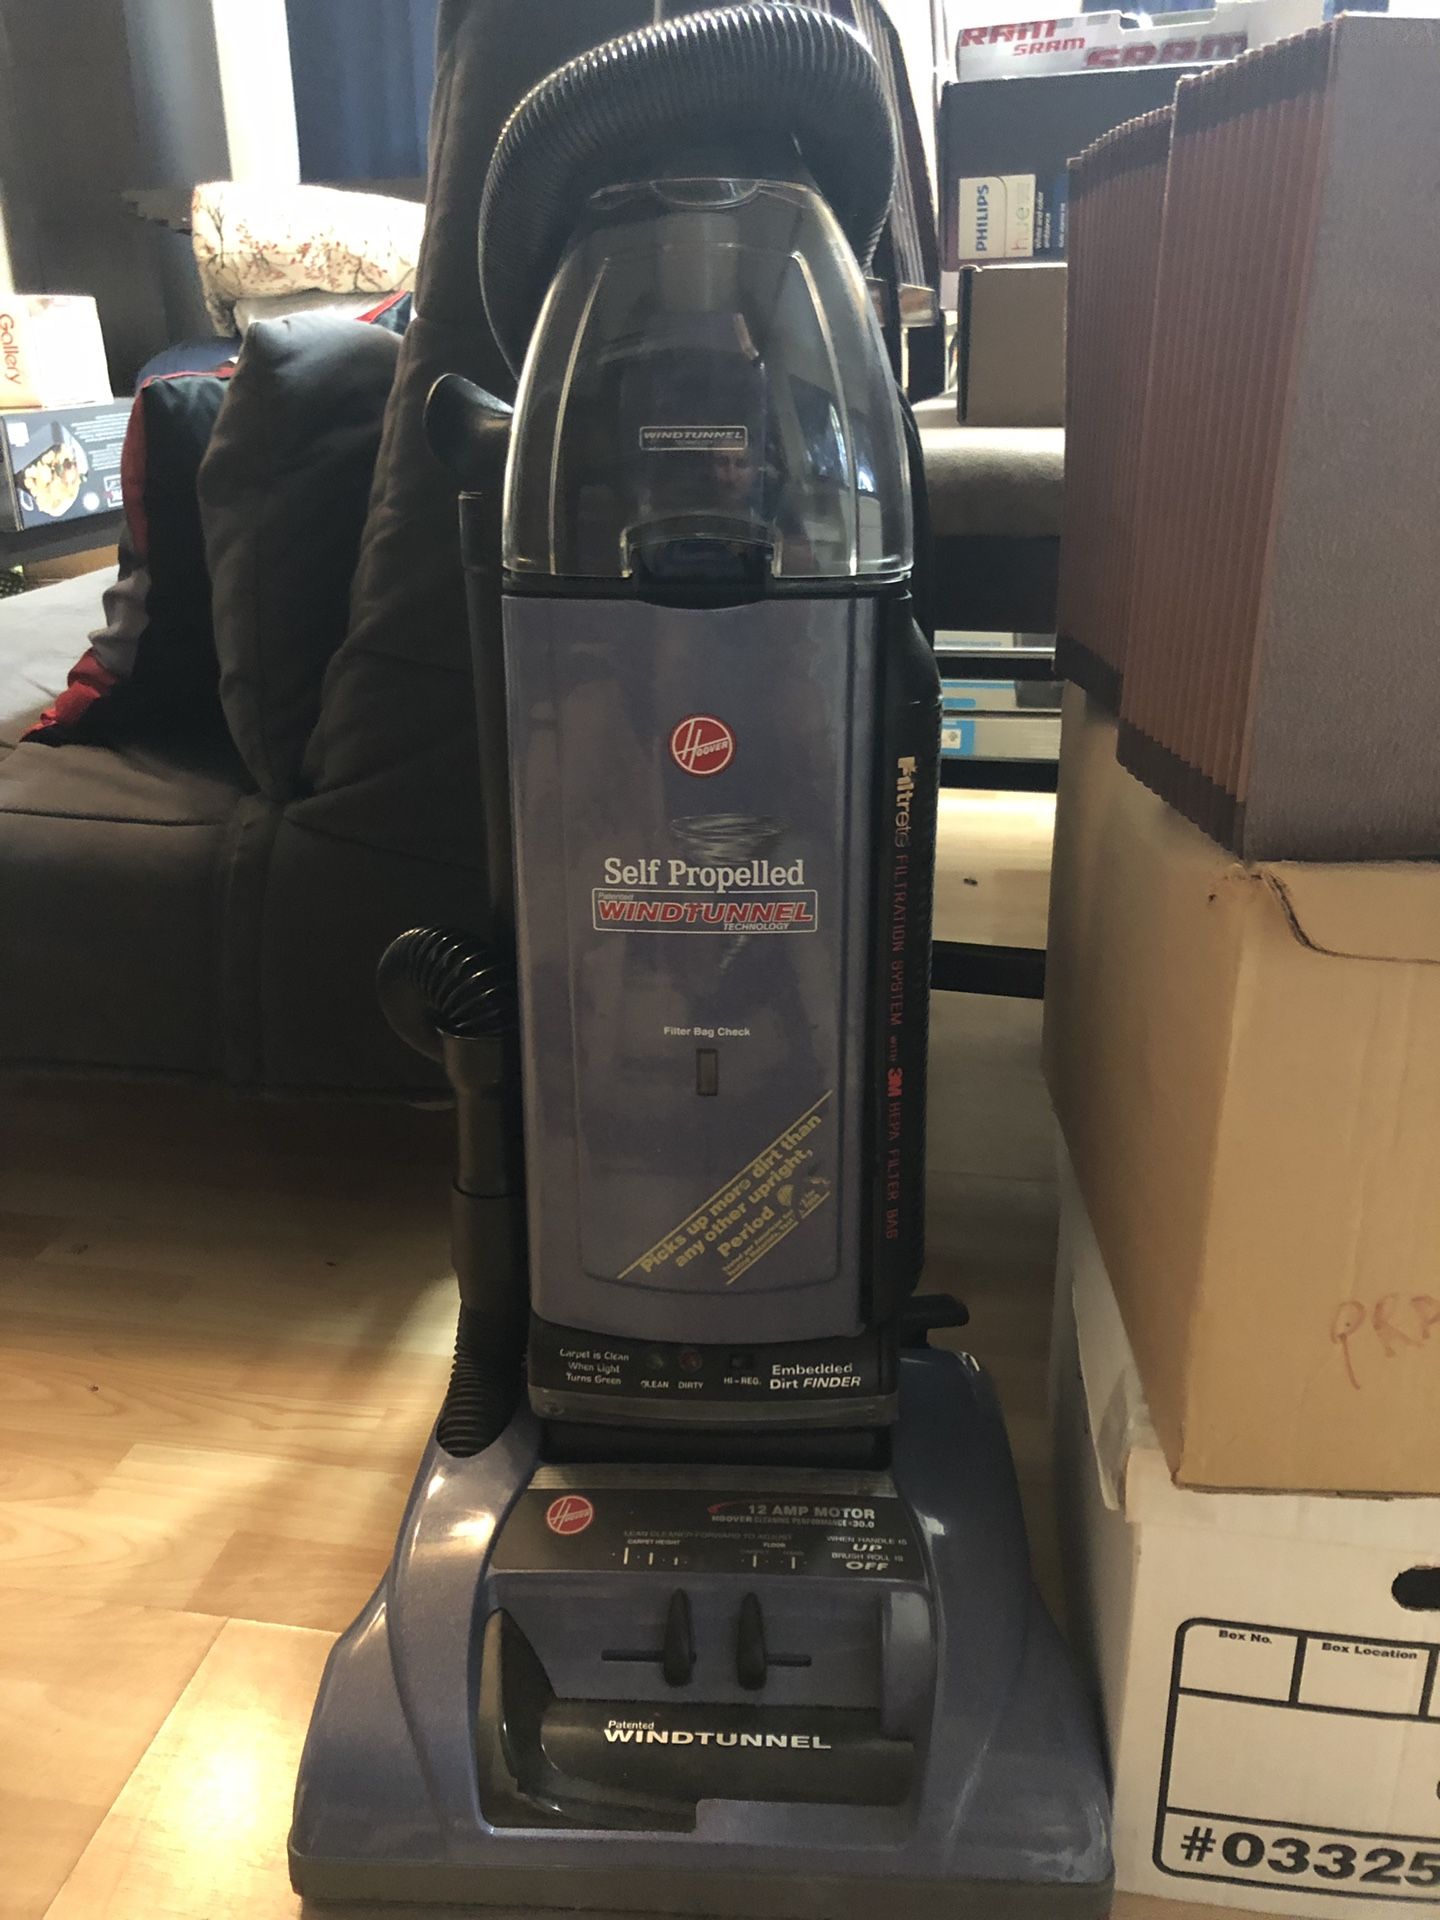 Hoover vacuum, lots of attachments. Professional cleaning